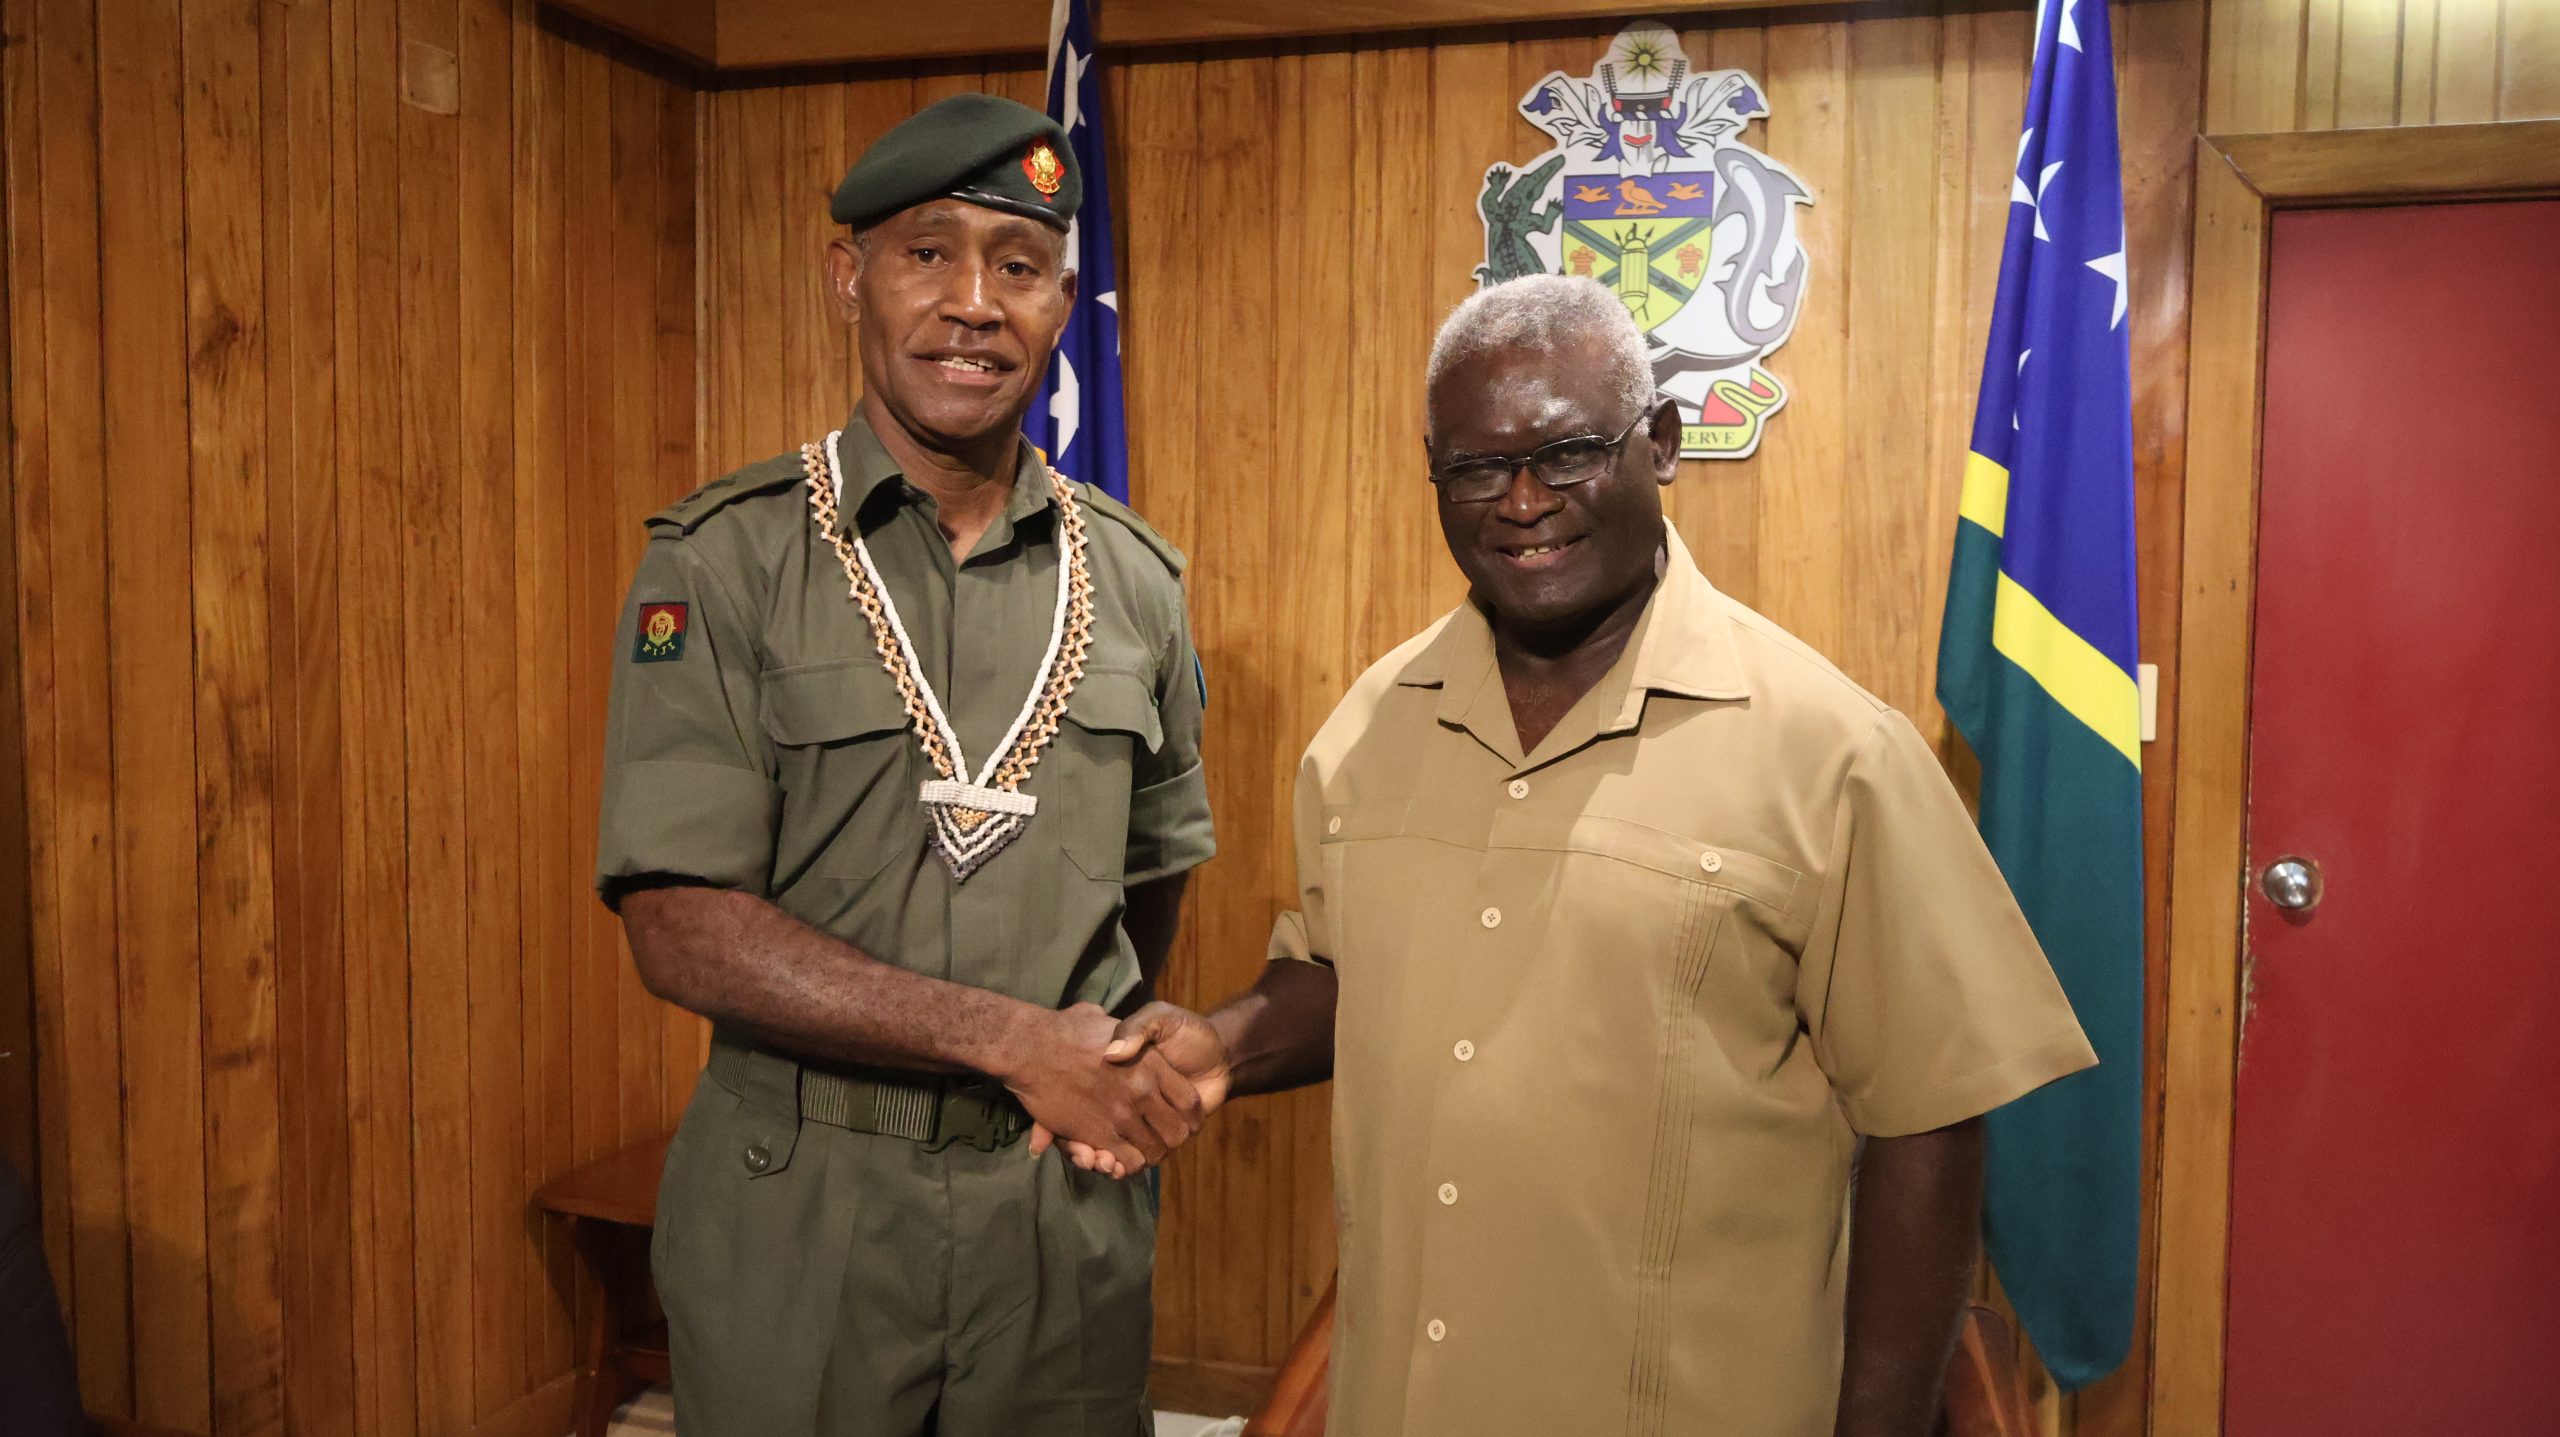 CARE- TAKER PM ACKNOWLEDGED FIJI MILITARY’S COMMUNITY ENGAGEMENTS